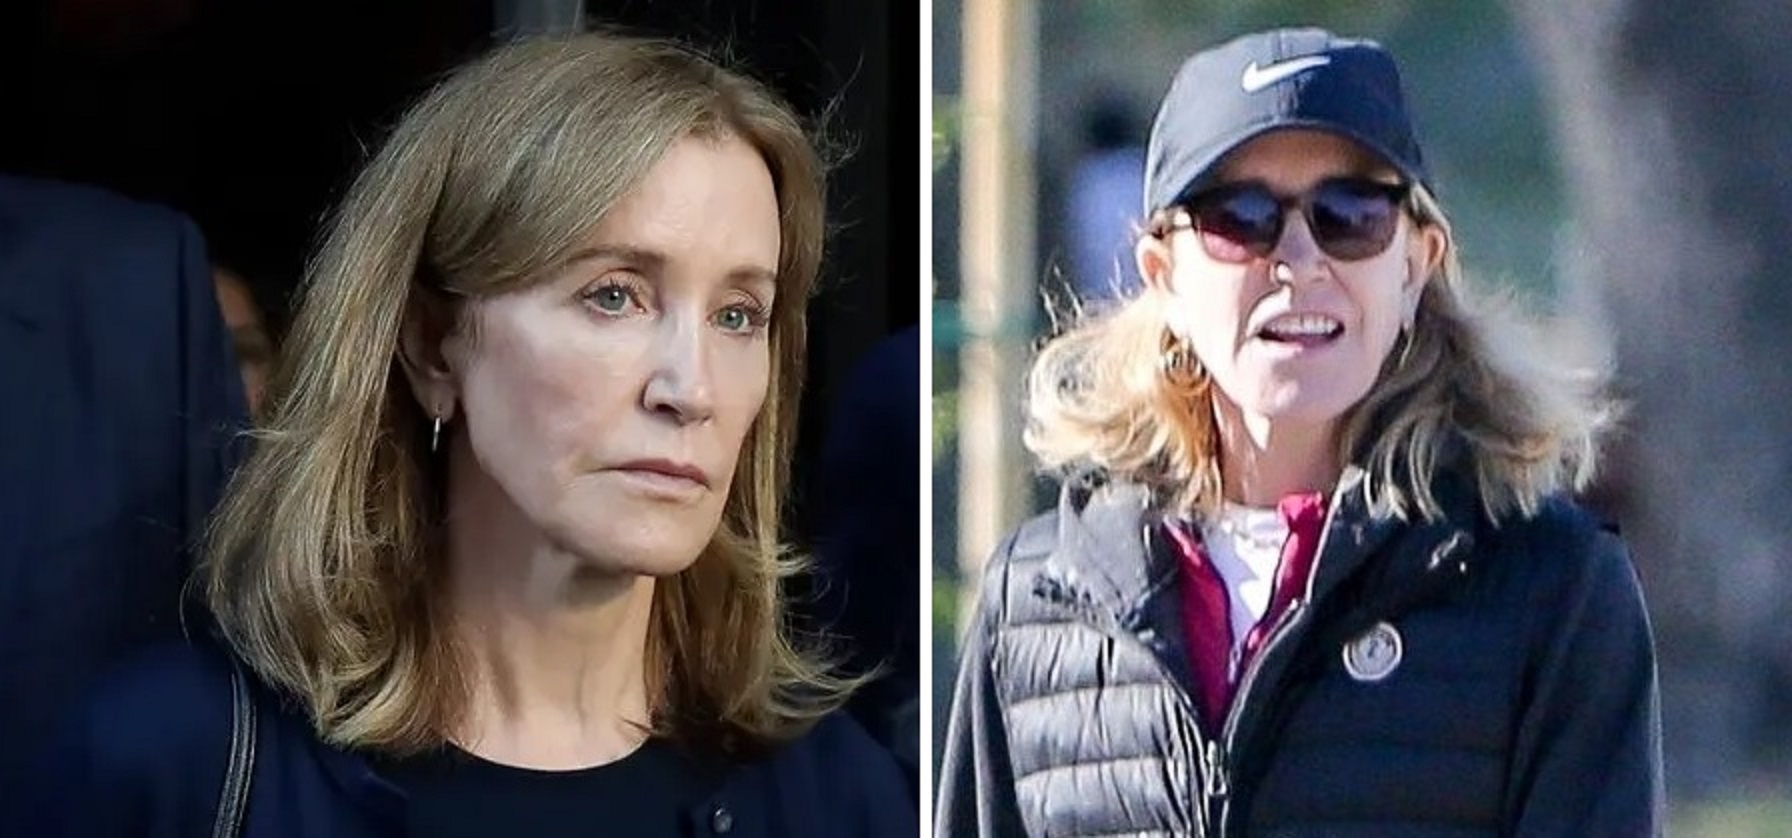 Felicity Huffman Spotted Doing Community Service After Prison Time, Following “College Scandal”